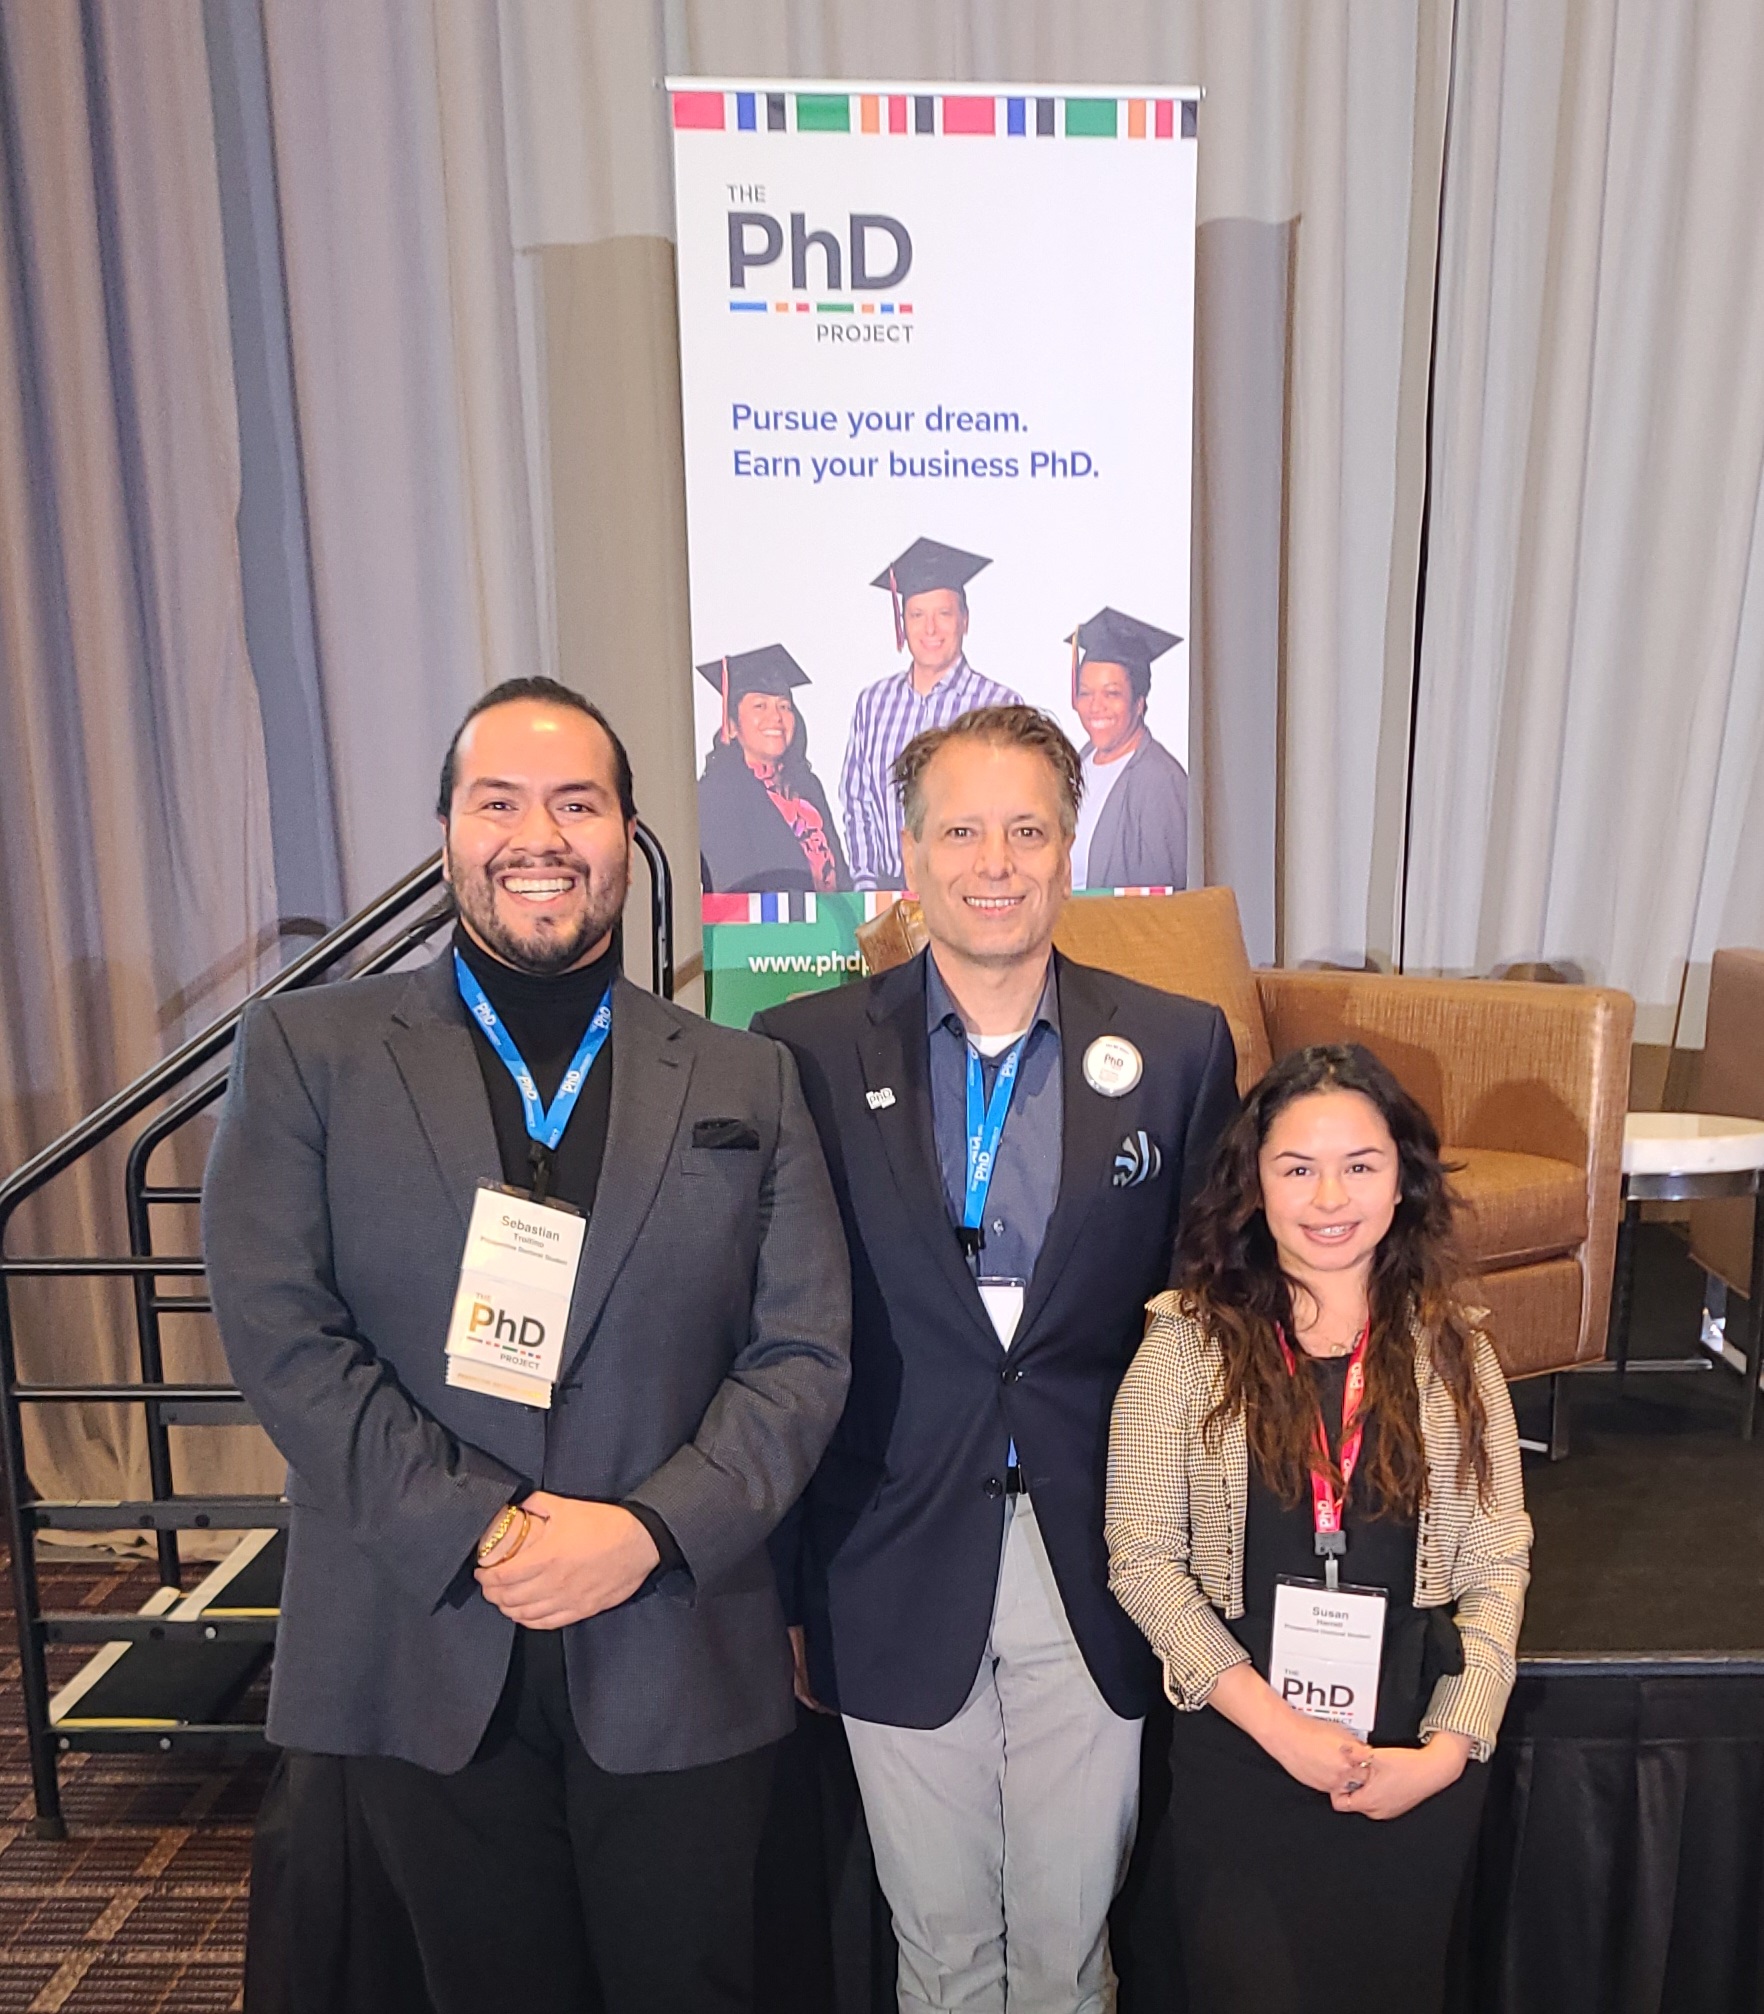 Ph.D. Project Conference with Dr. Conde and 2 UHD students